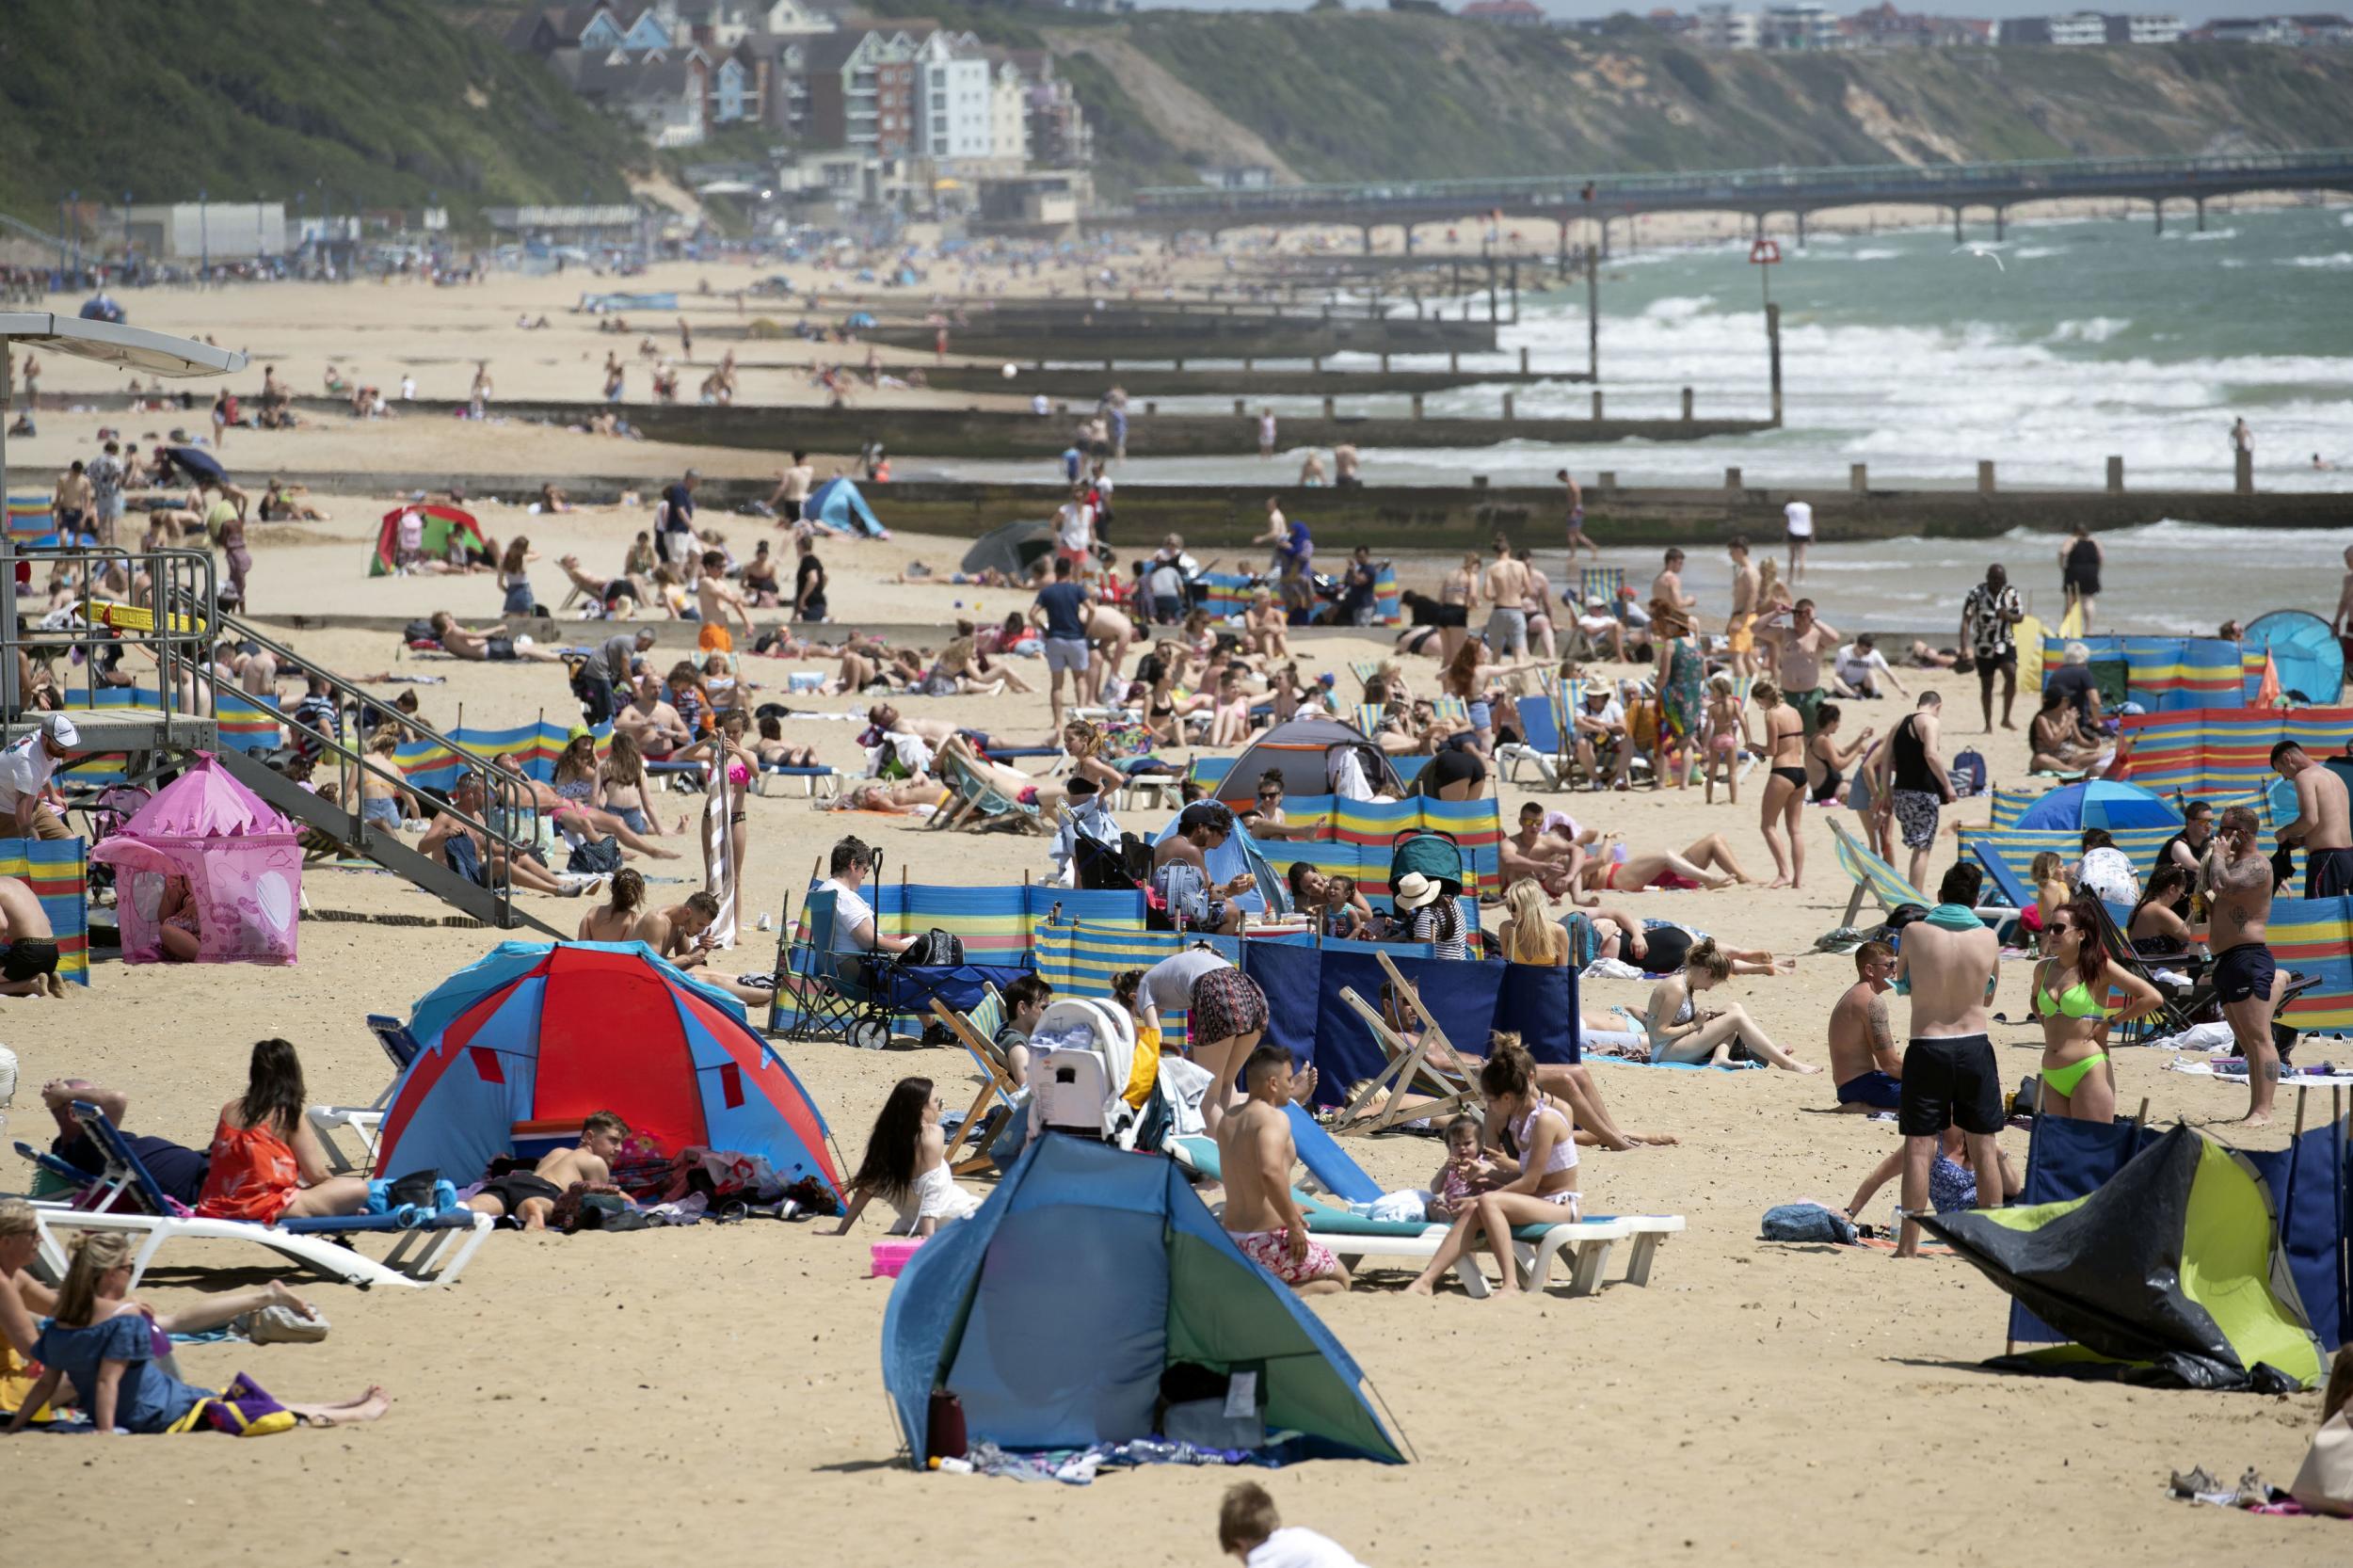 UK weather: Saturday to be 'hottest of 2019' as police issue heatwave warnings